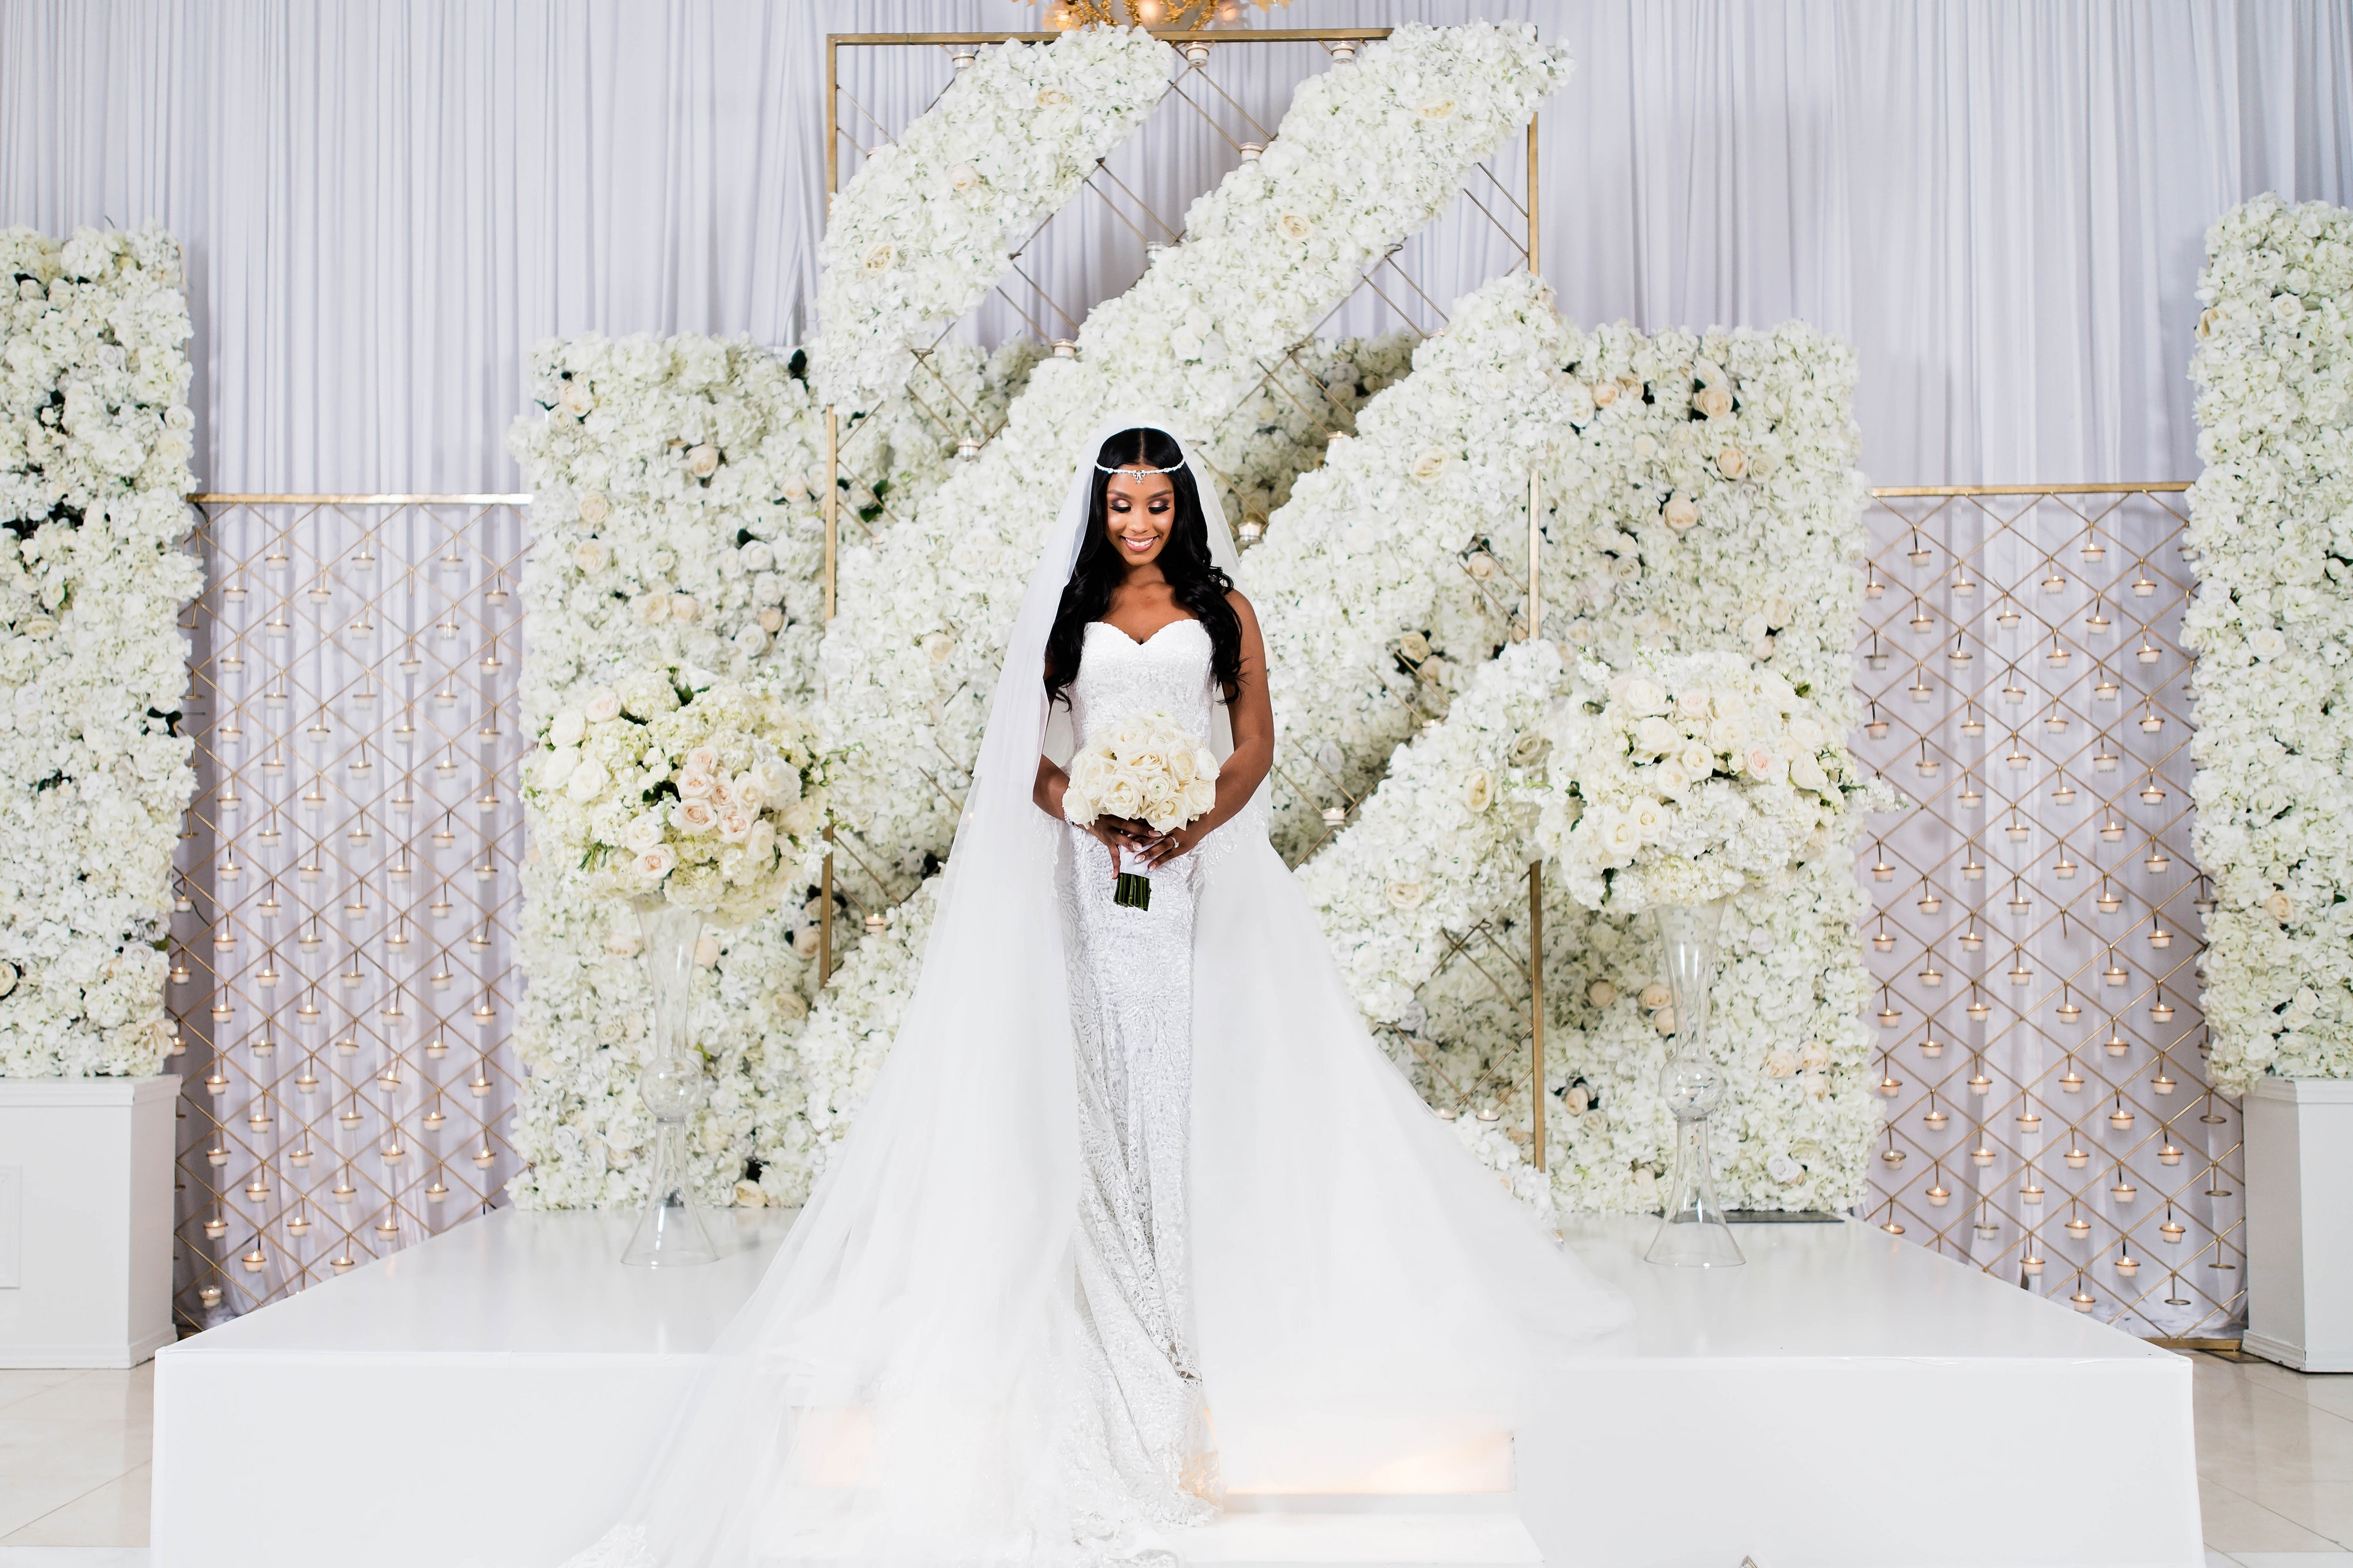 African American bride at her Luxury white floral wedding ceremony decor - Photography: Pharris Photos